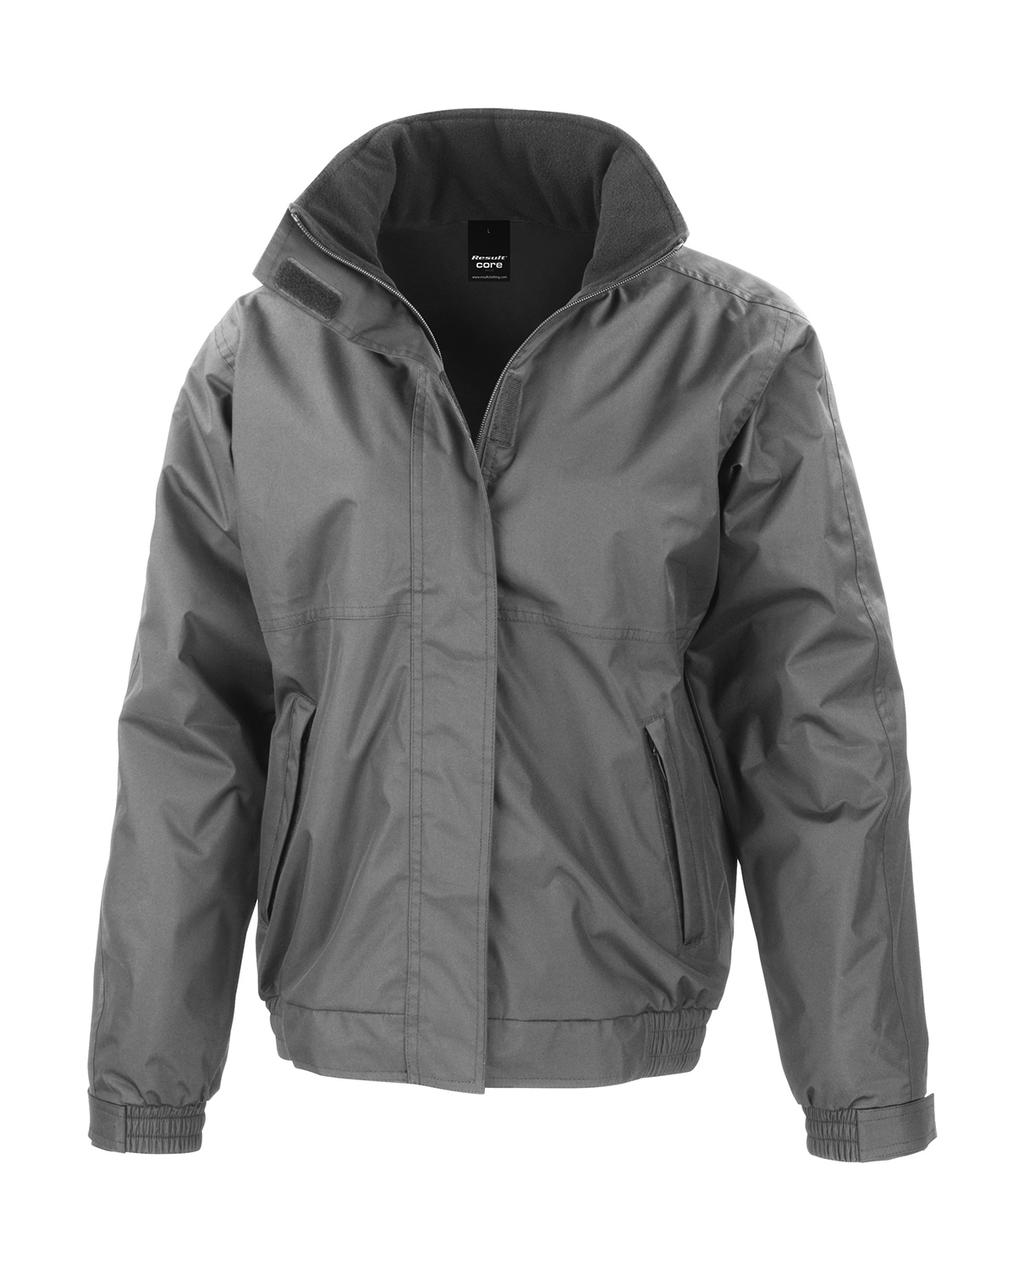  Channel Jacket in Farbe Grey